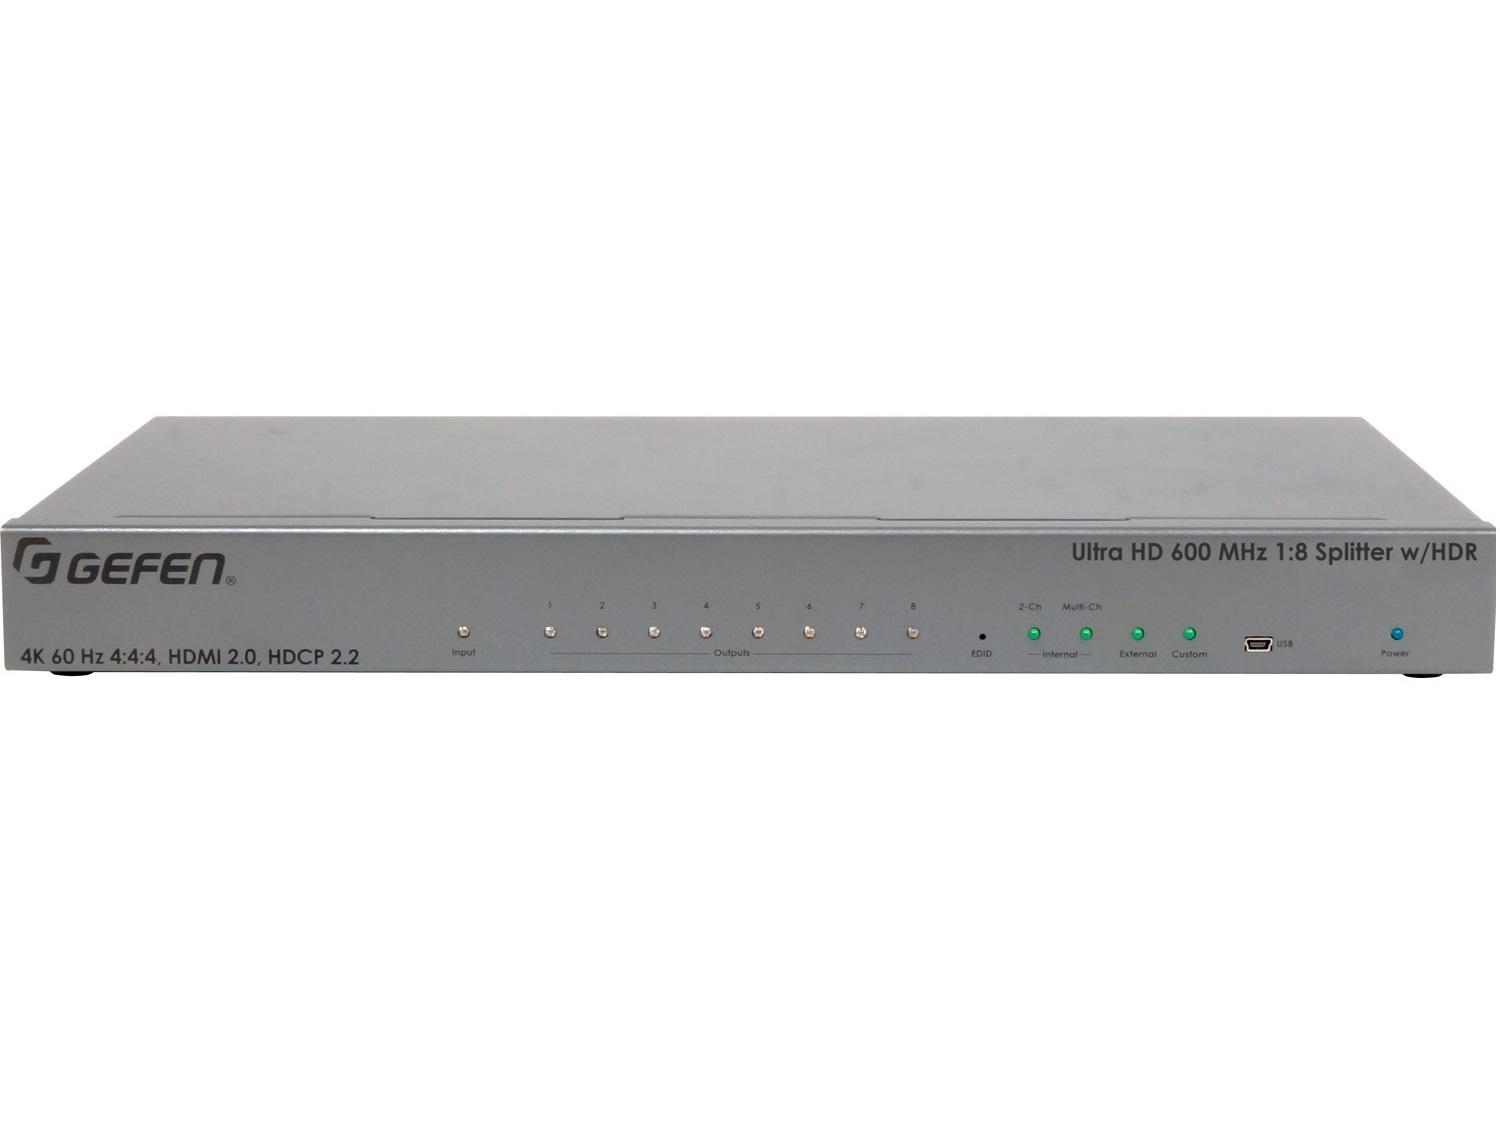 Gefen EXT-UHD600-18 4K Ultra HD 600 MHz 1x8 Splitter with HDR